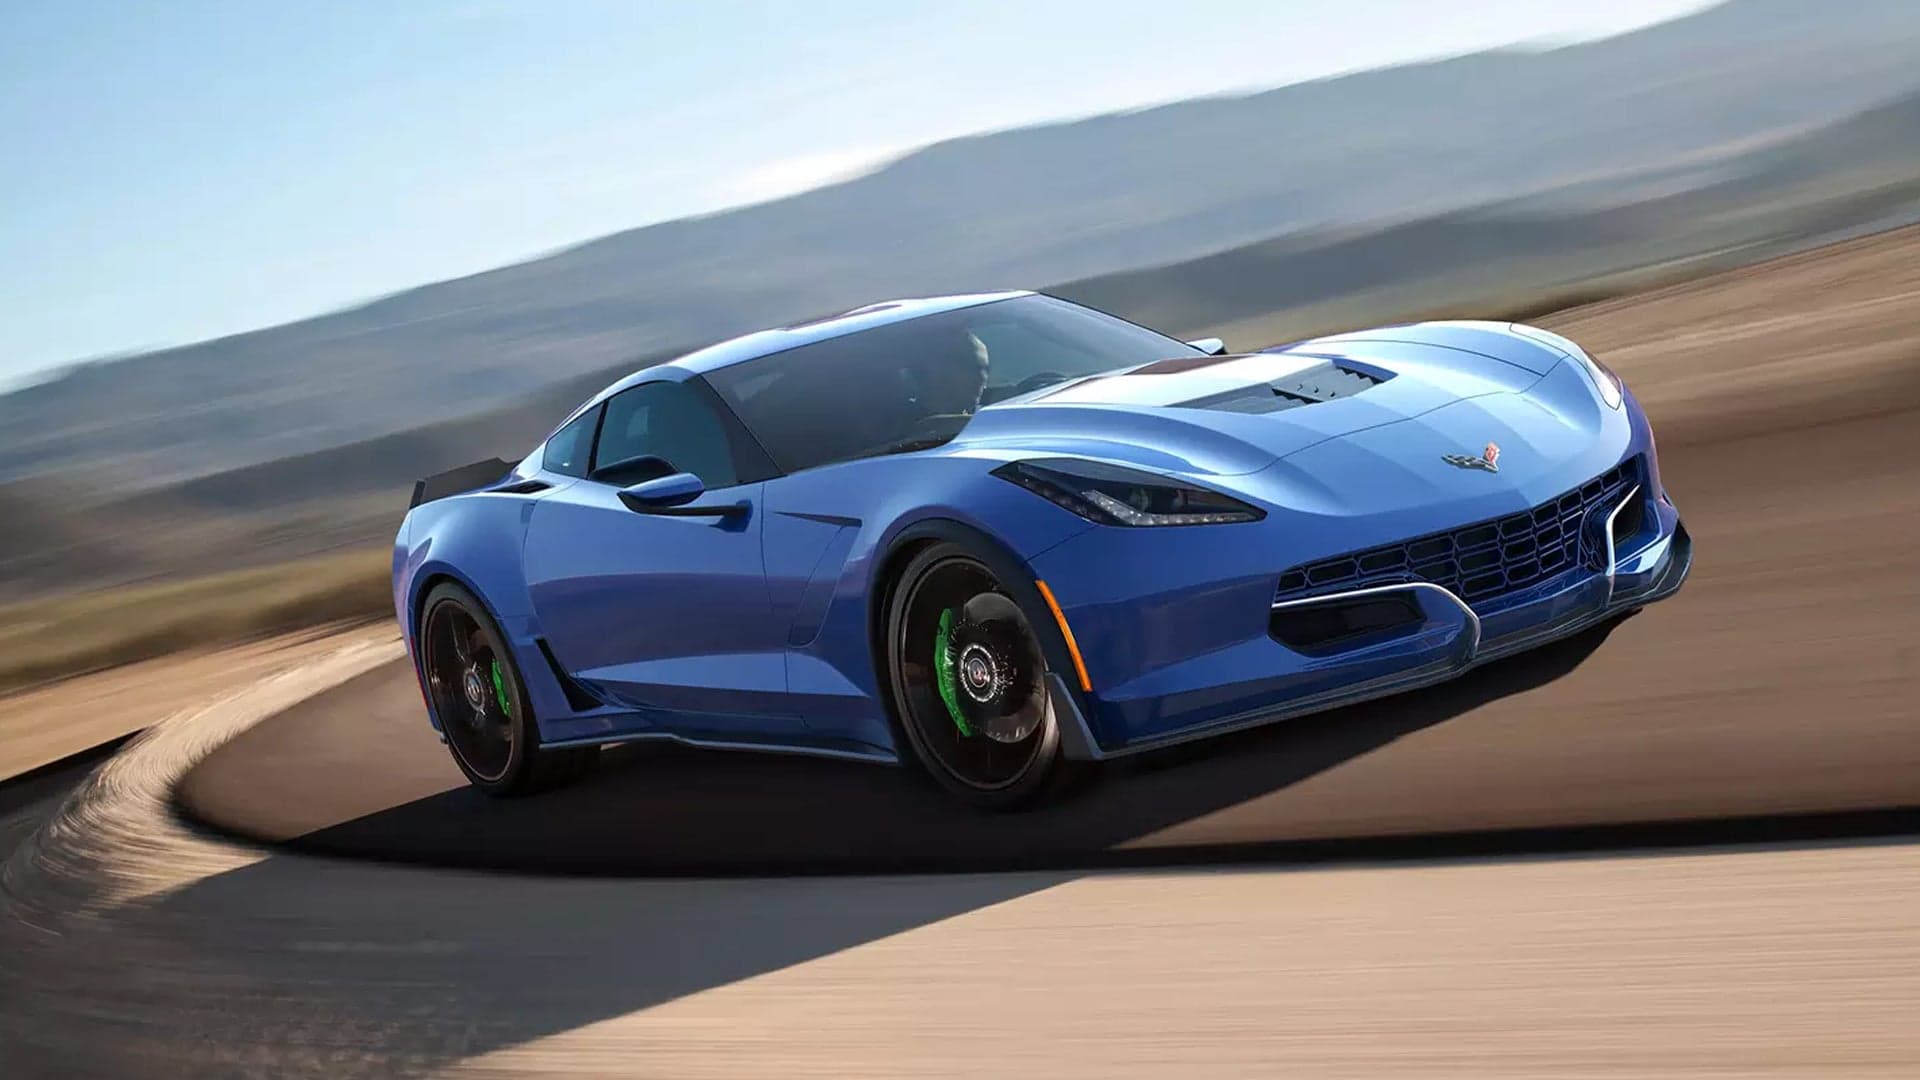 Genovation’s All-Electric Corvette With a Manual Gearbox Is Debuting at CES 2018